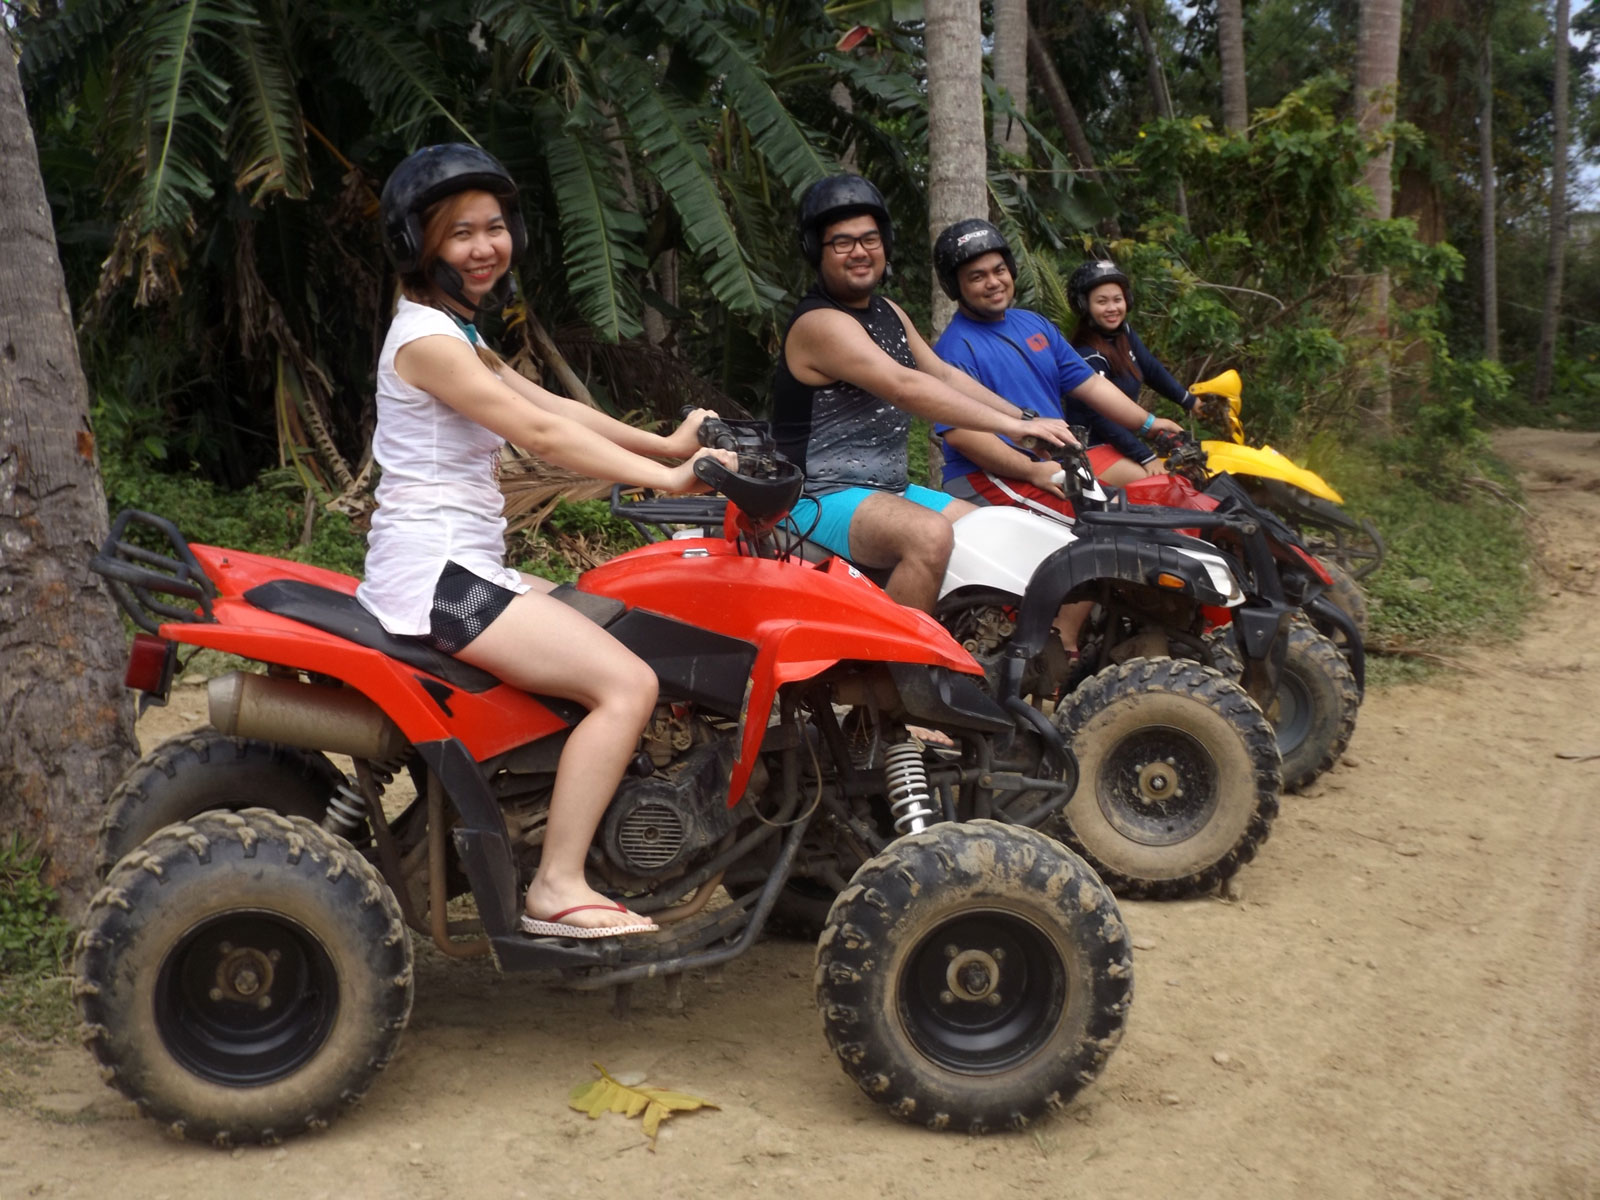 Come and try our ATV's in our off-road track. It is perhaps one of the most heart pumping activities you can find in Puerto Galera, Mindoro.